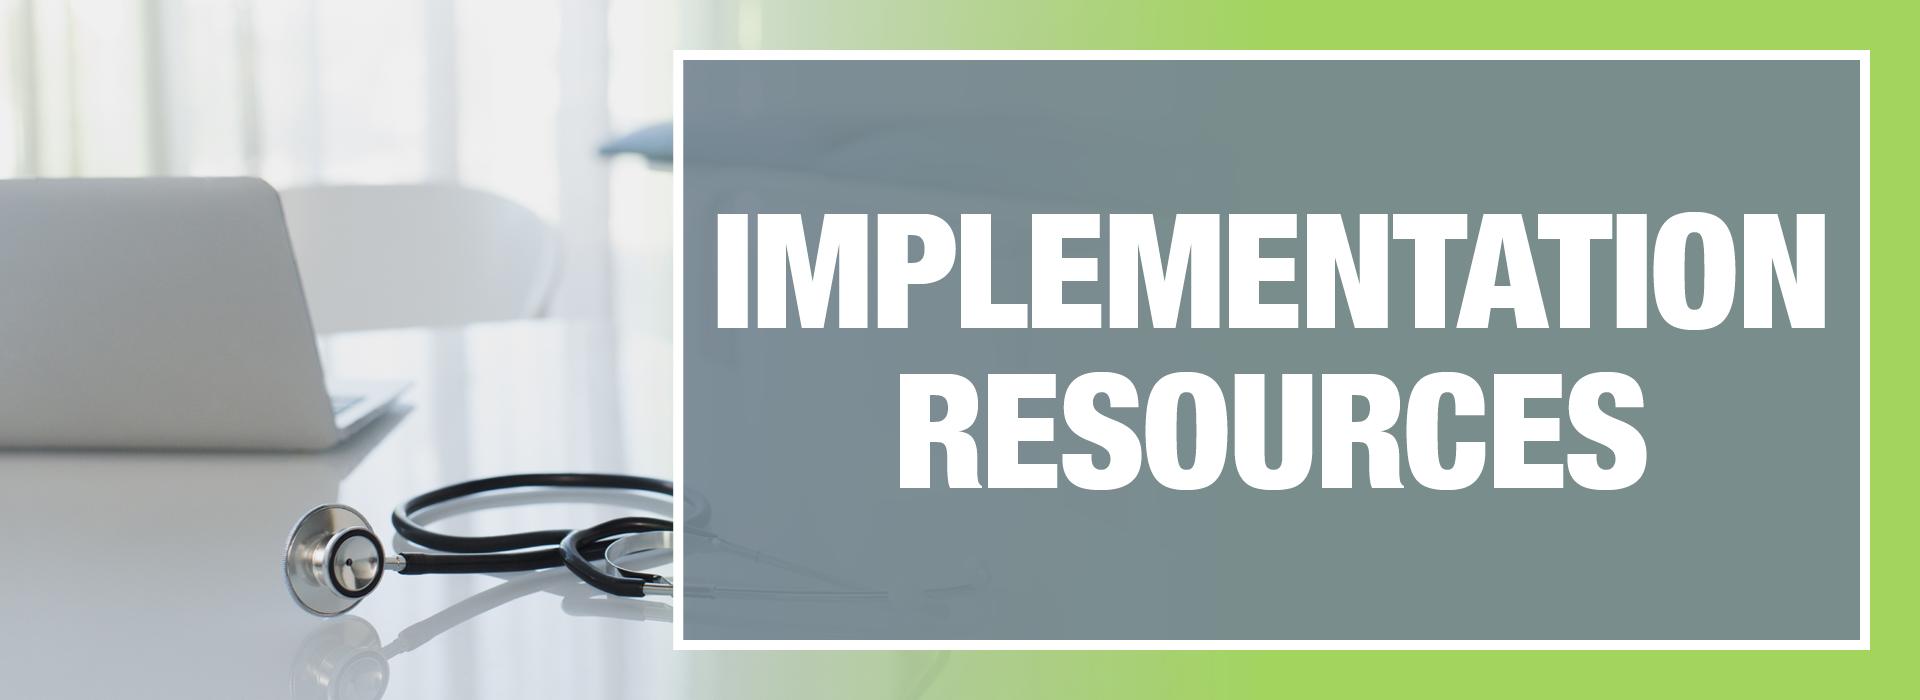 IMPLEMENTATION RESOURCES